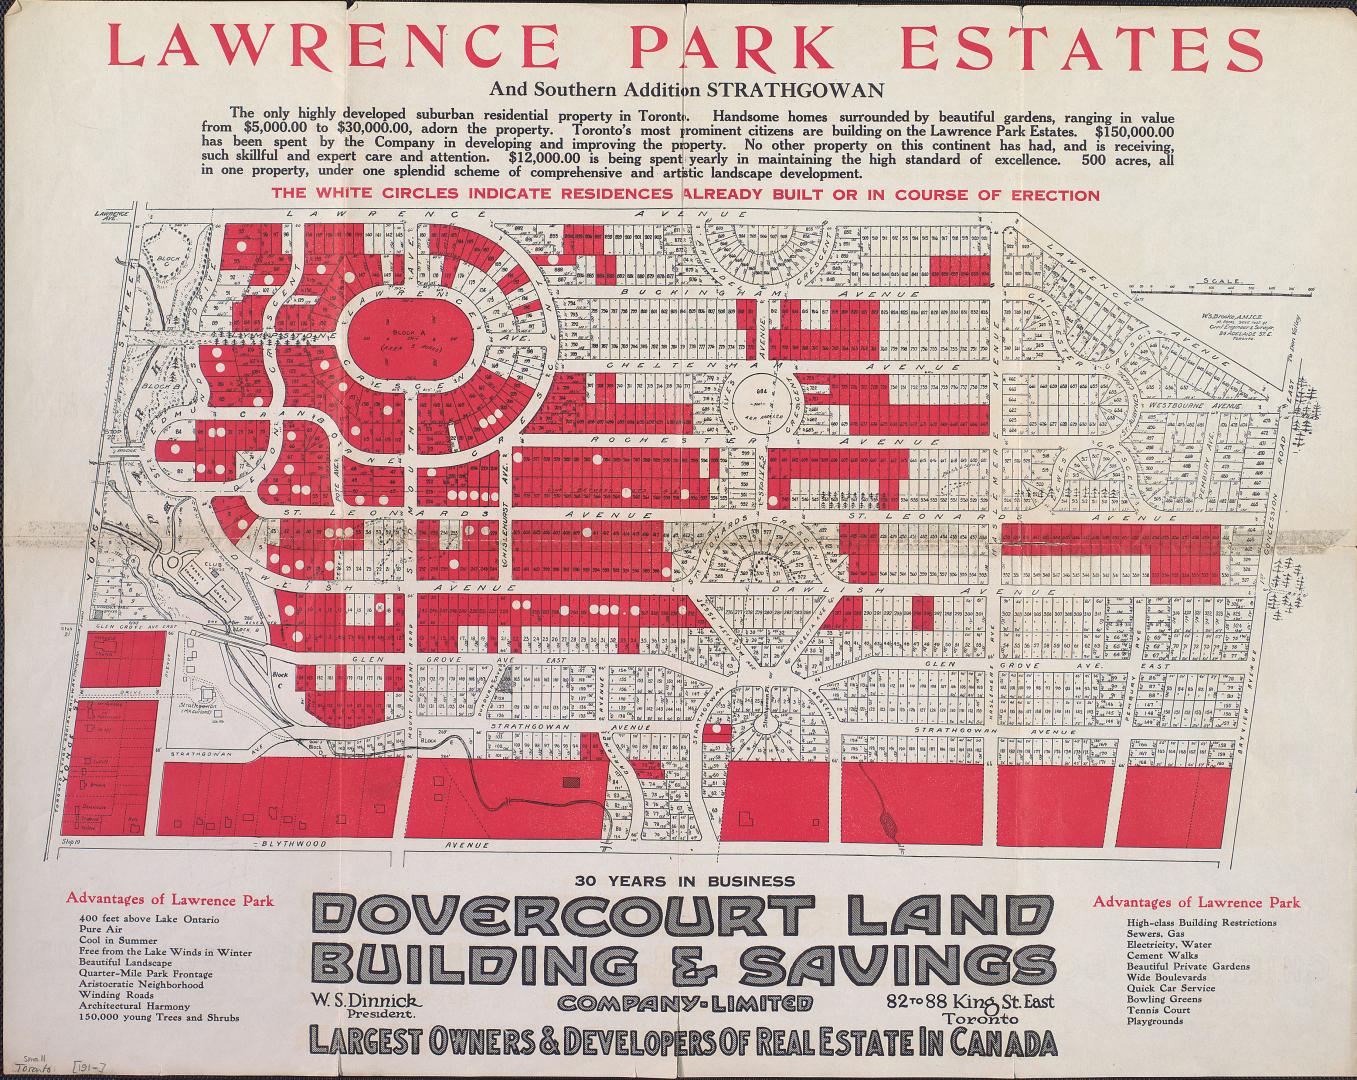 Image shows a map of Lawrence Park estates and southern addition Strathgowan, Toronto, Ontario. ...